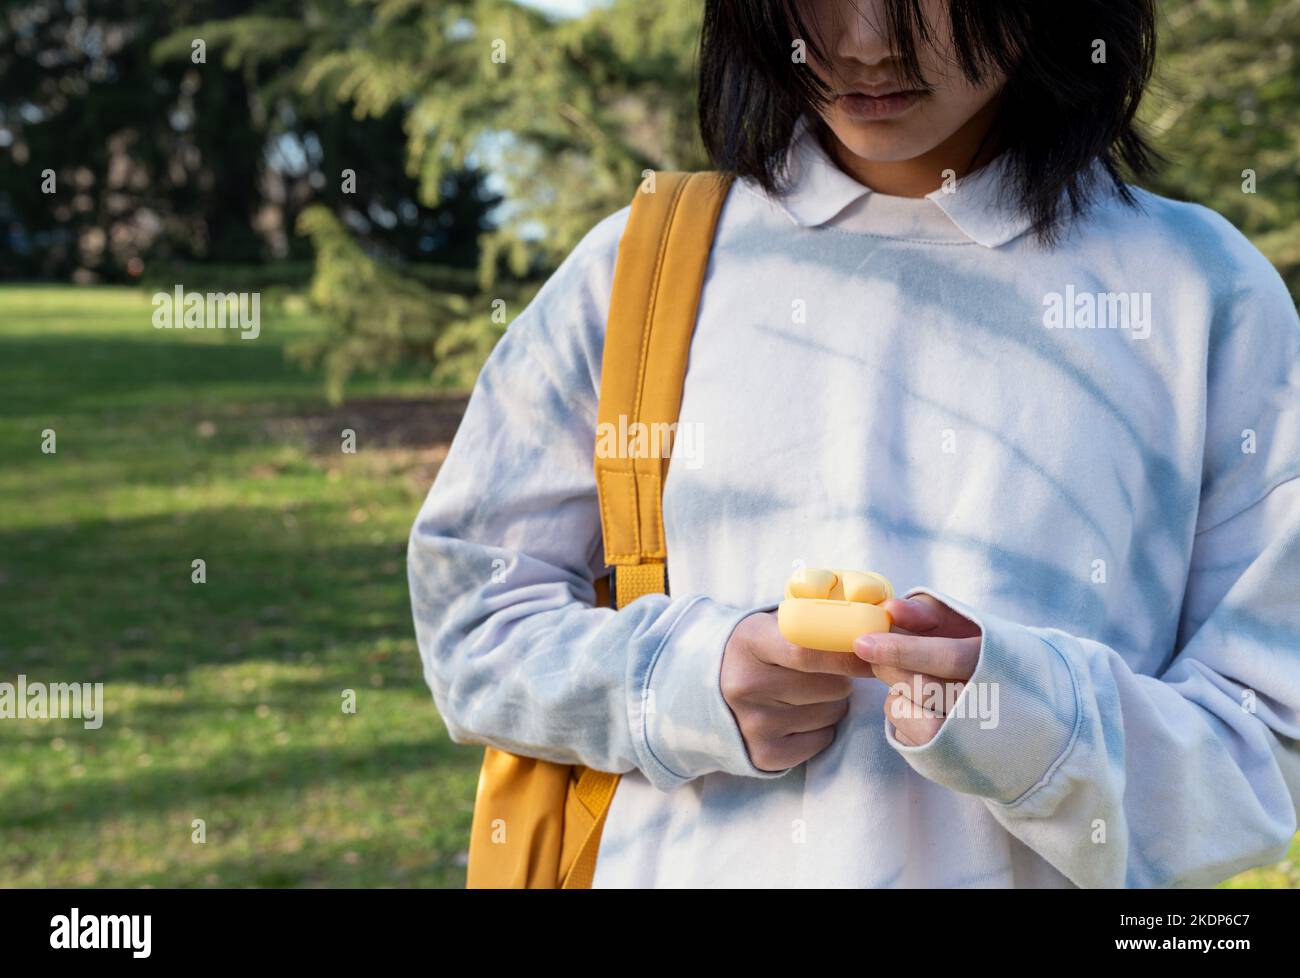 Unrecognizable girl with yellow backpack and earphones on hands at the park. Stock Photo